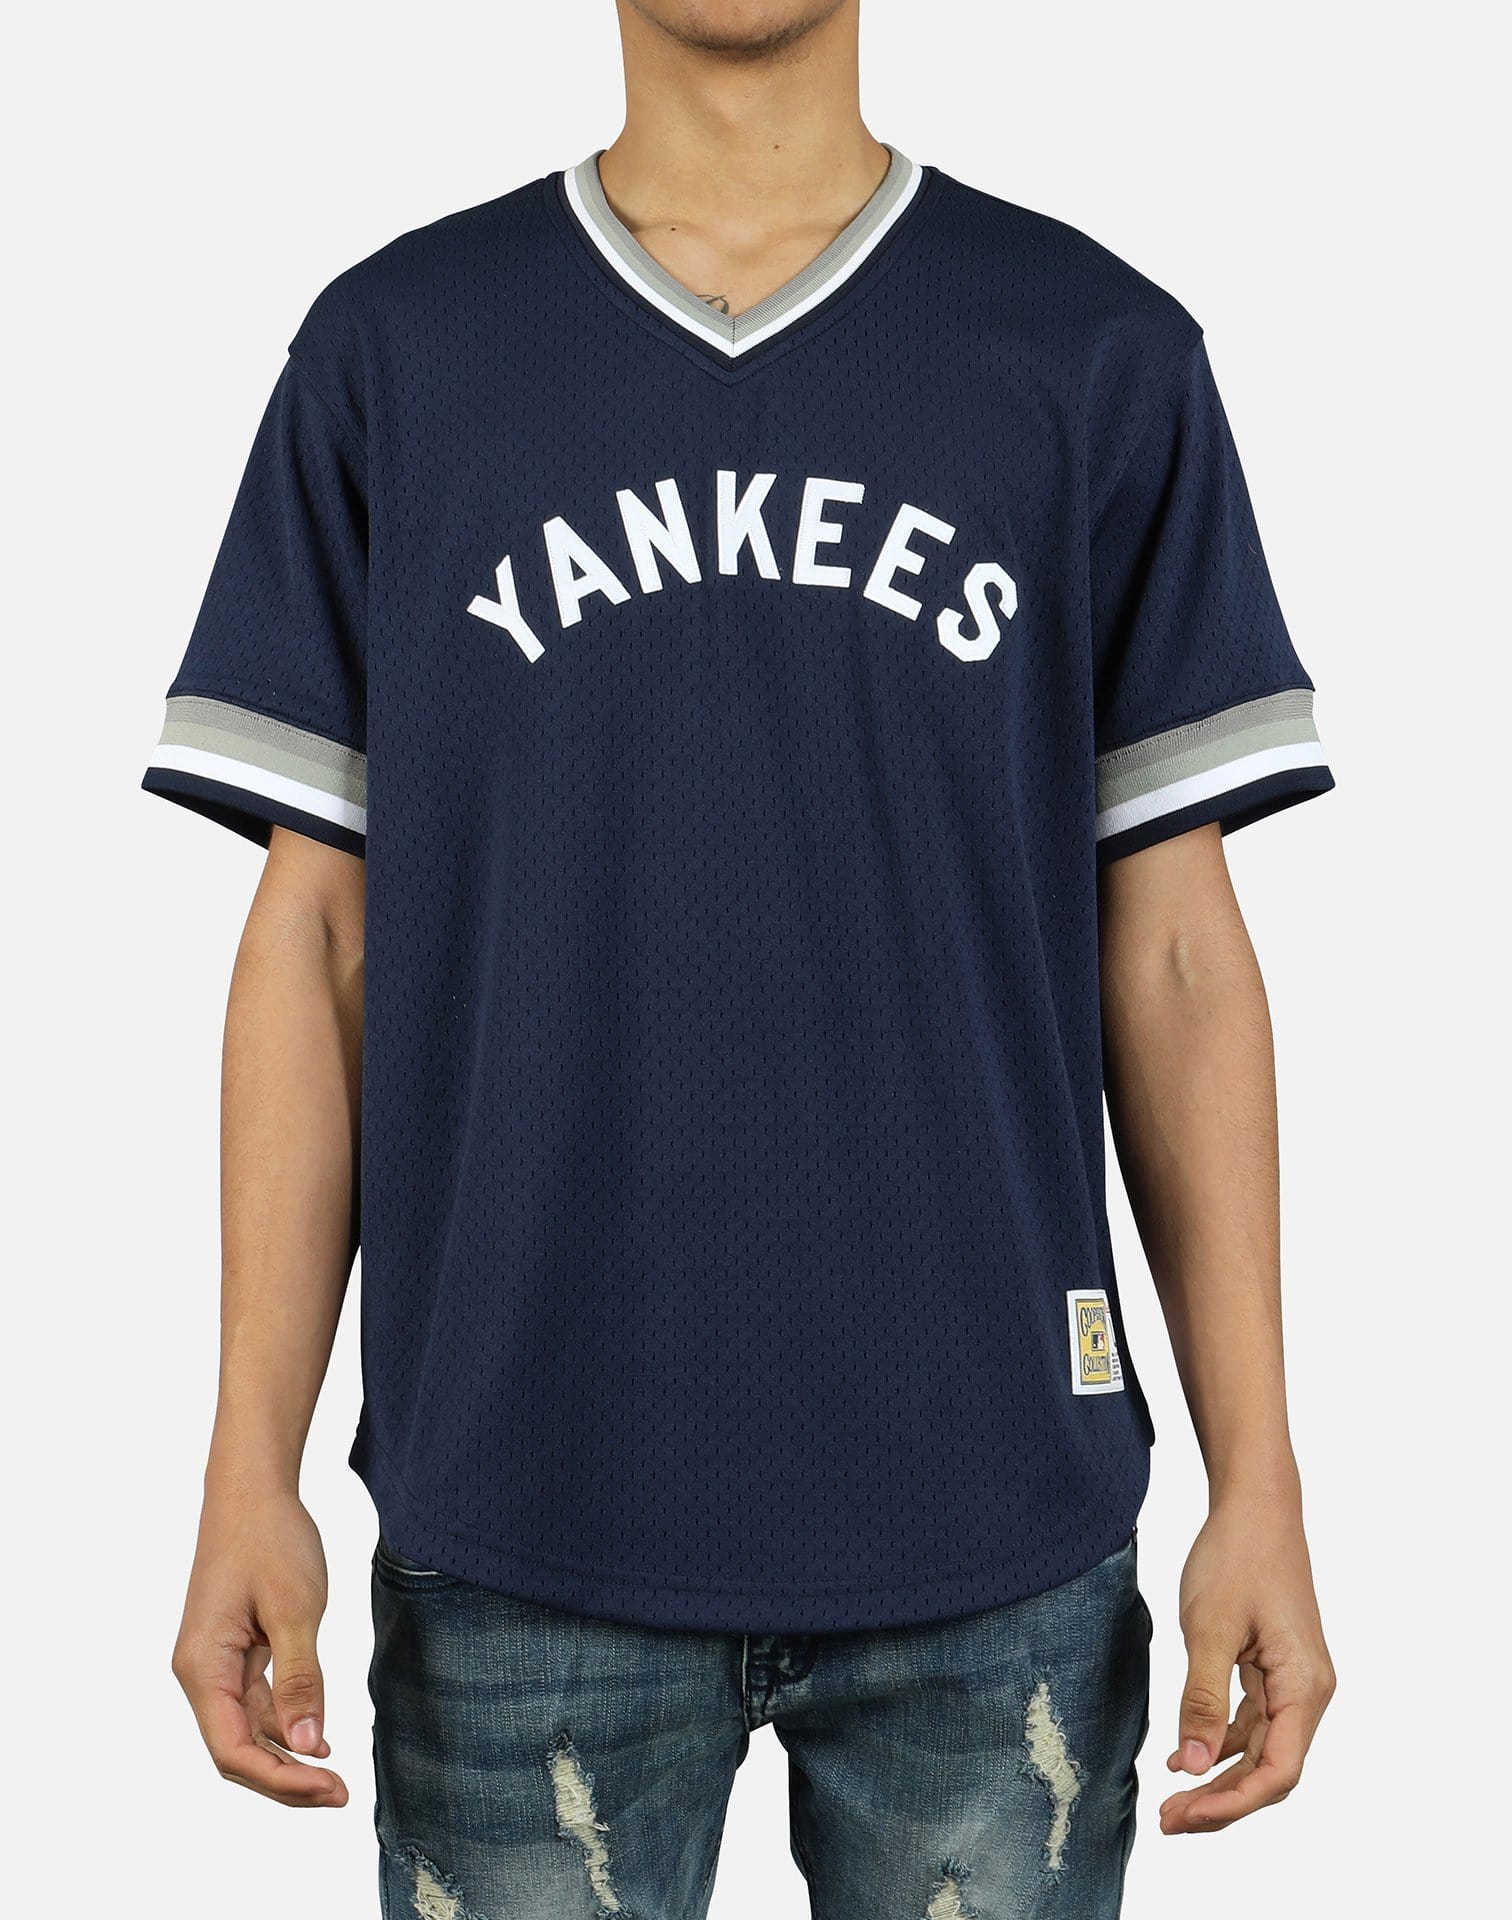 Official New York Yankees Mitchell & Ness Jerseys, Yankees Mitchell & Ness  Baseball Jerseys, Uniforms